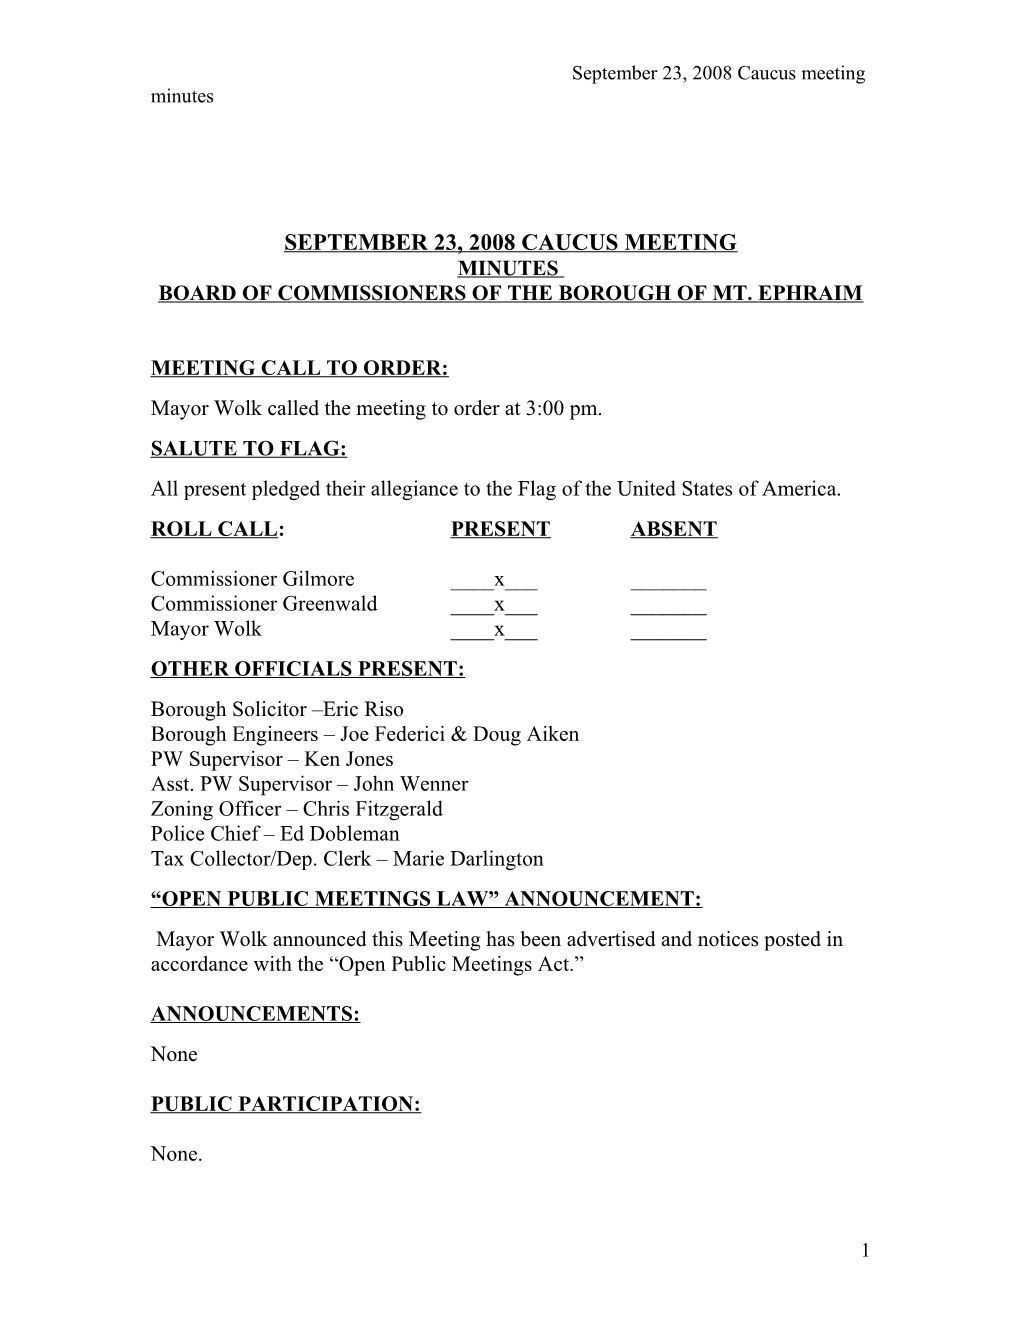 Minutes of the April 22, 2008 Caucus Meeting of the Honorable Board of Commissioners Of